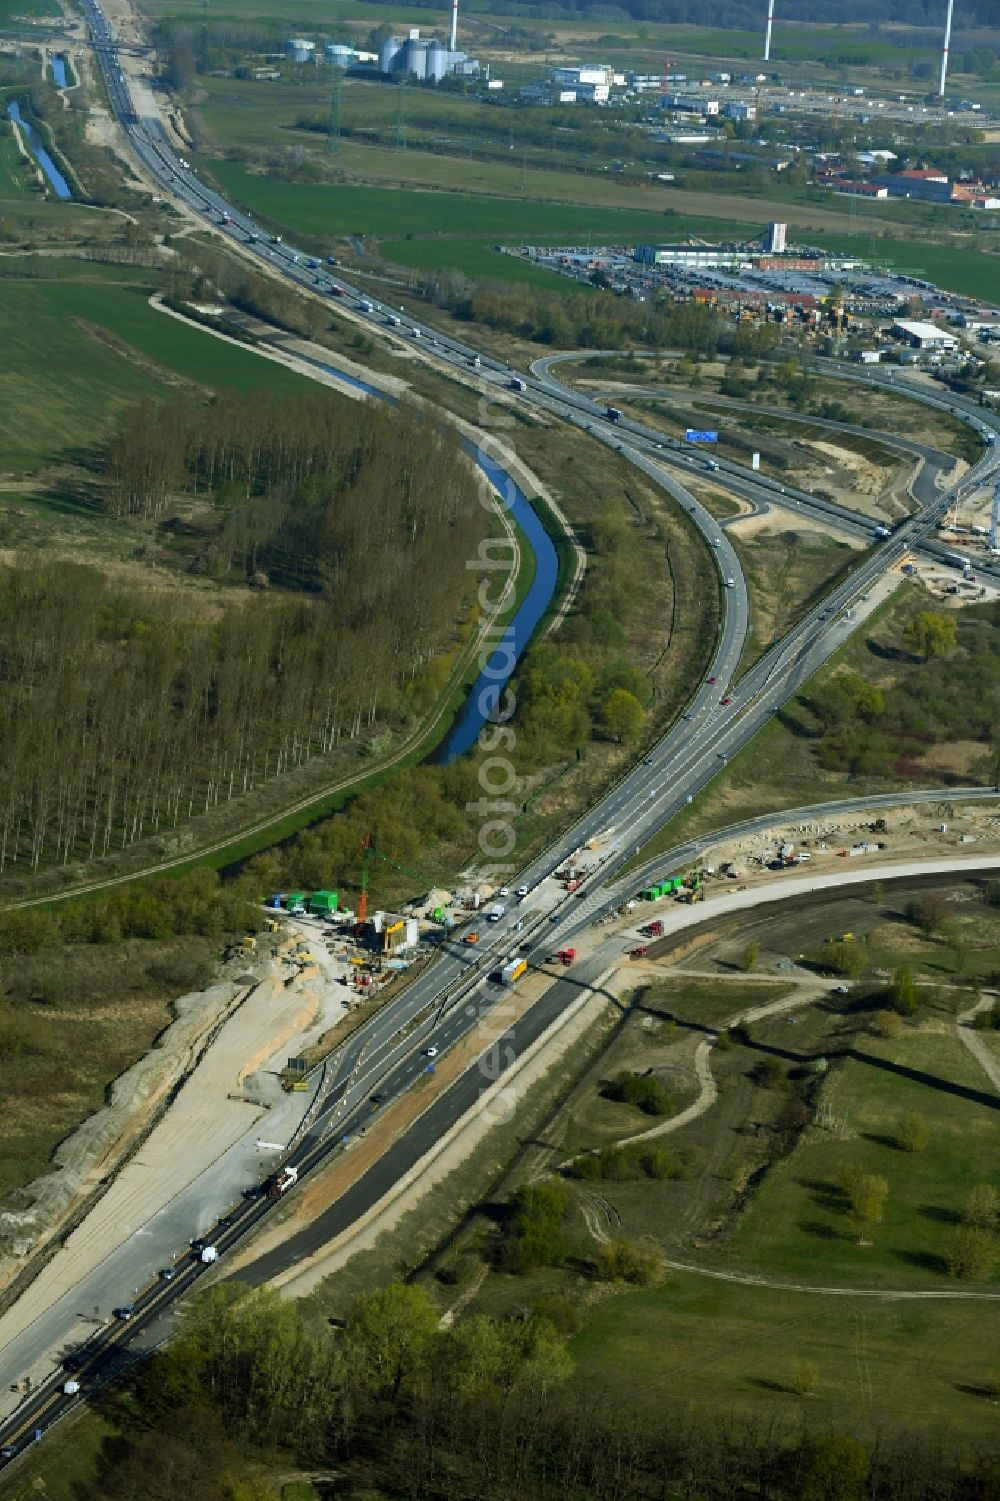 Schönerlinde from above - Construction to extend the traffic flow at the intersection- motorway A 114 - A10 - Dreieck Pankow in Schoenerlinde in the state Brandenburg, Germany